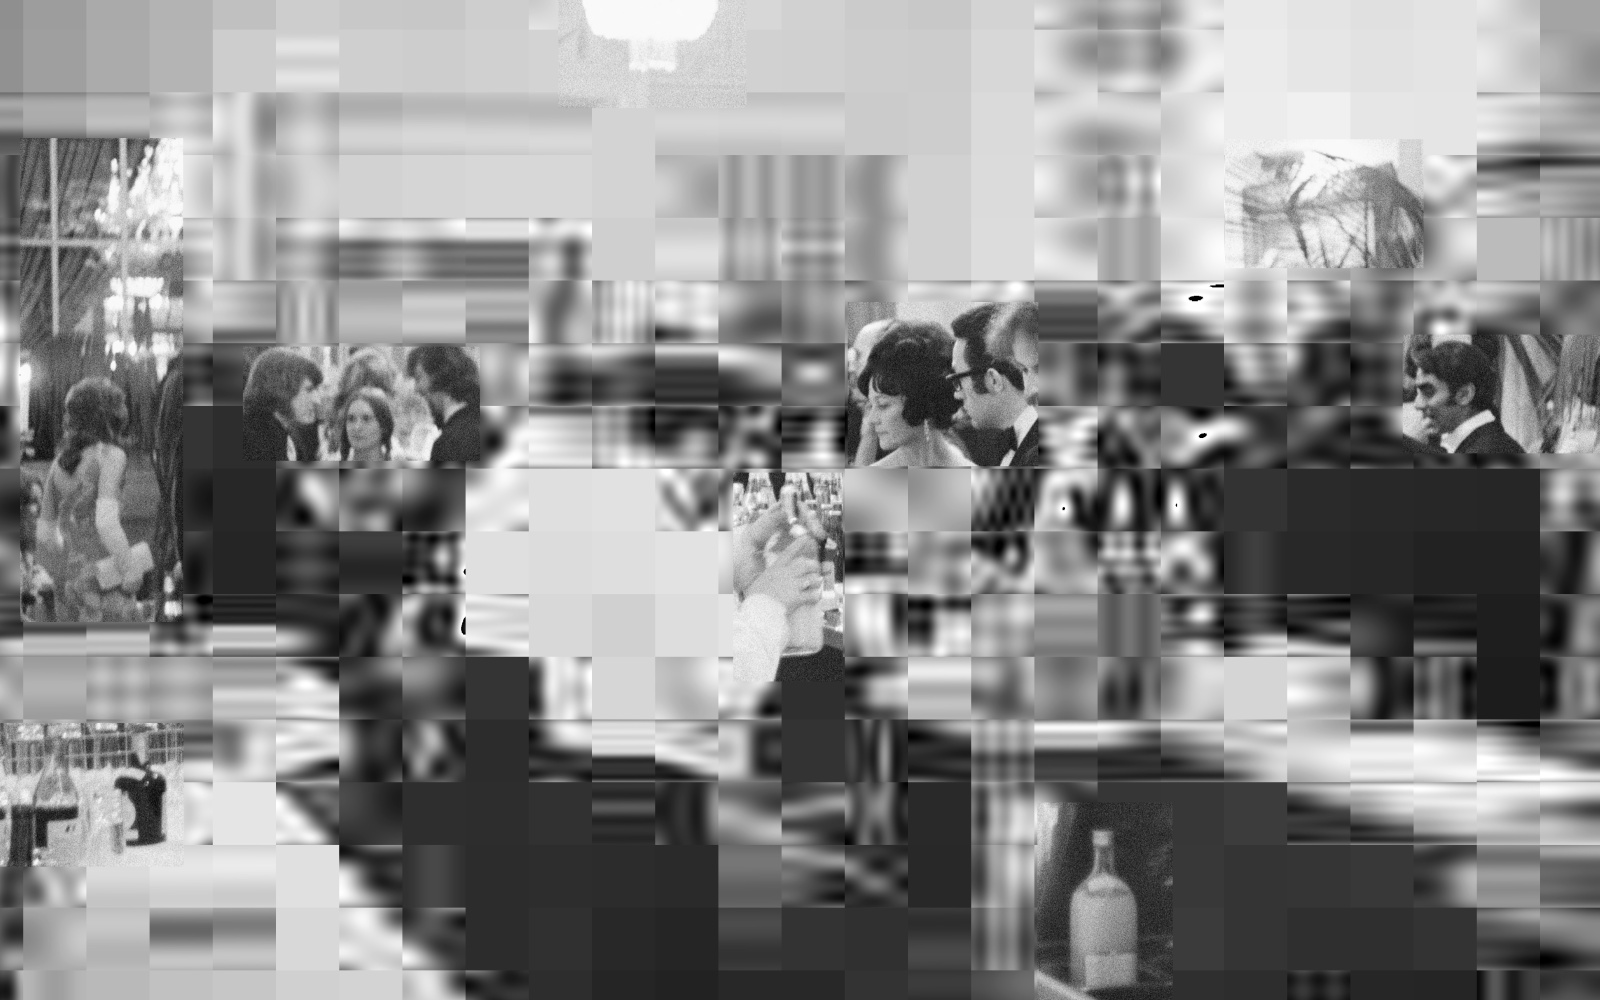 Partially pixelated black and white image of an evening event.